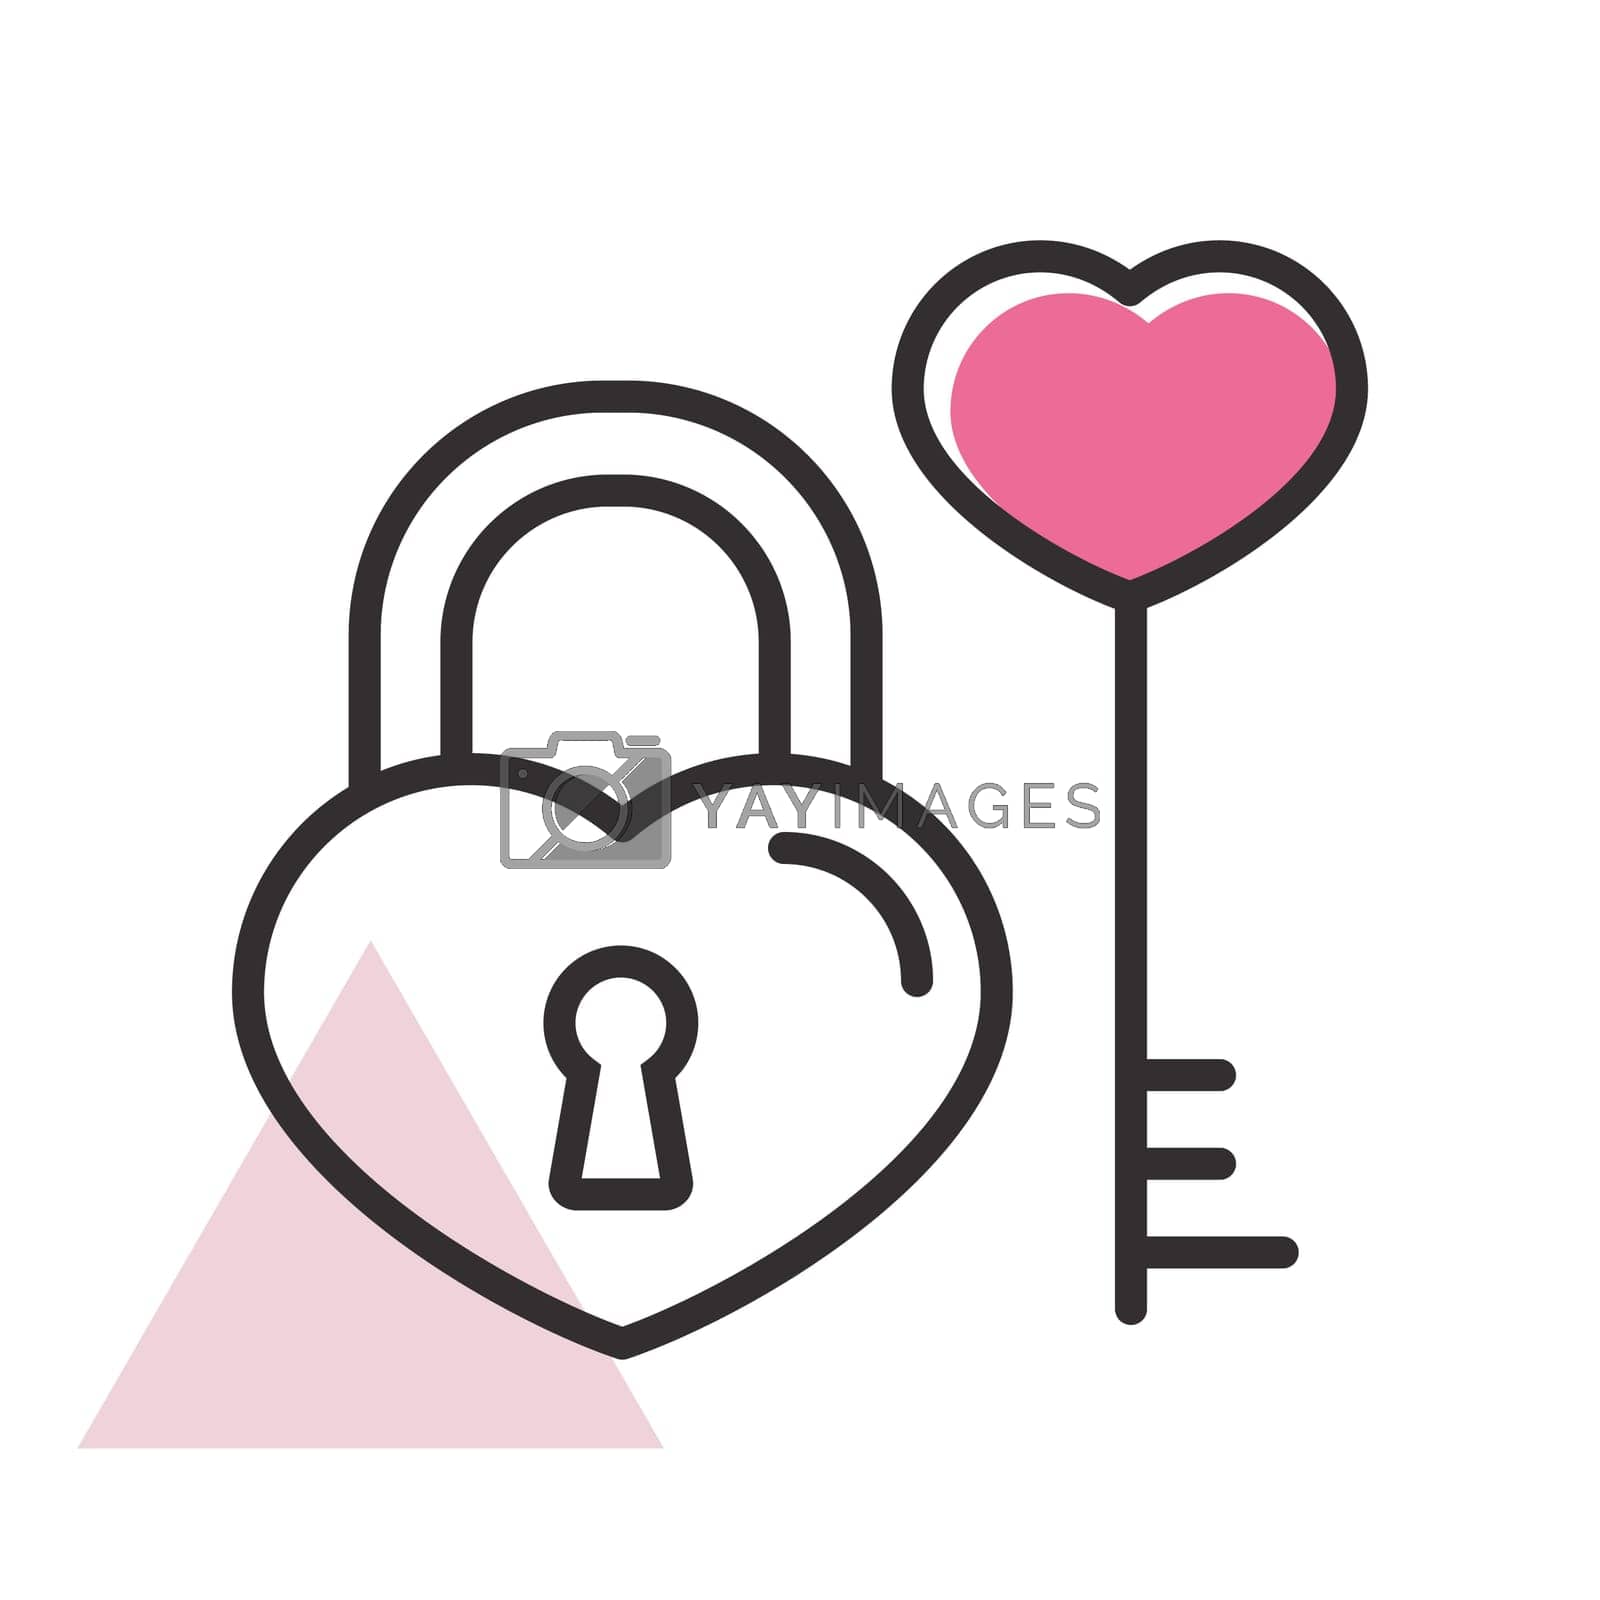 Royalty free image of Key and lock in heart shape vector icon by nosik